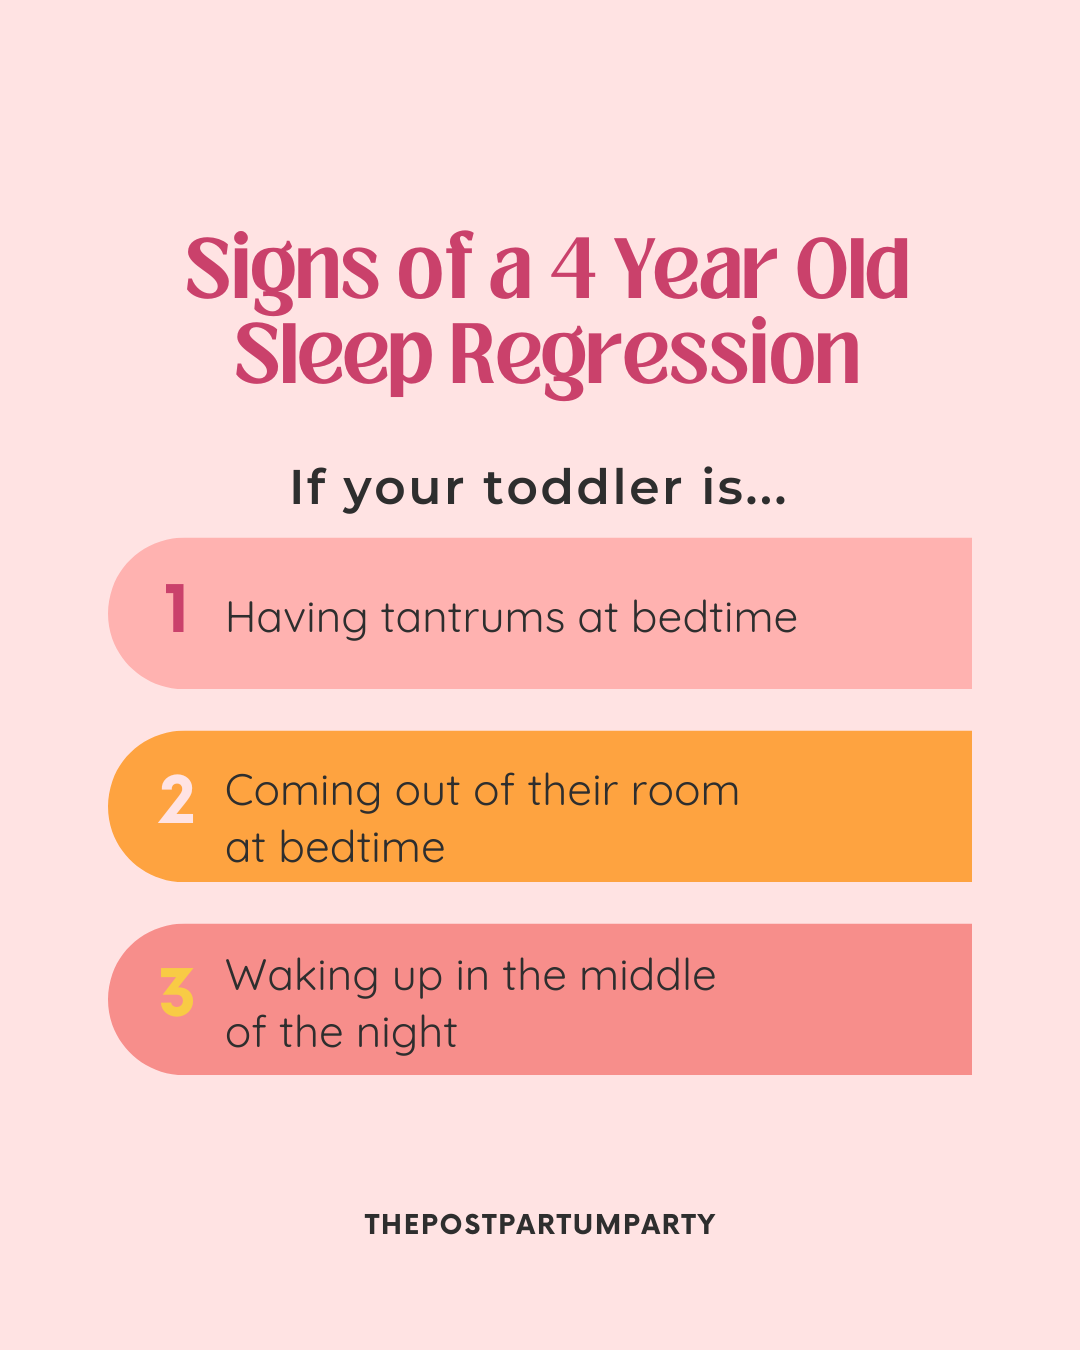 5 Tips if You’re Struggling with A Four-Year-Old Sleep Regression